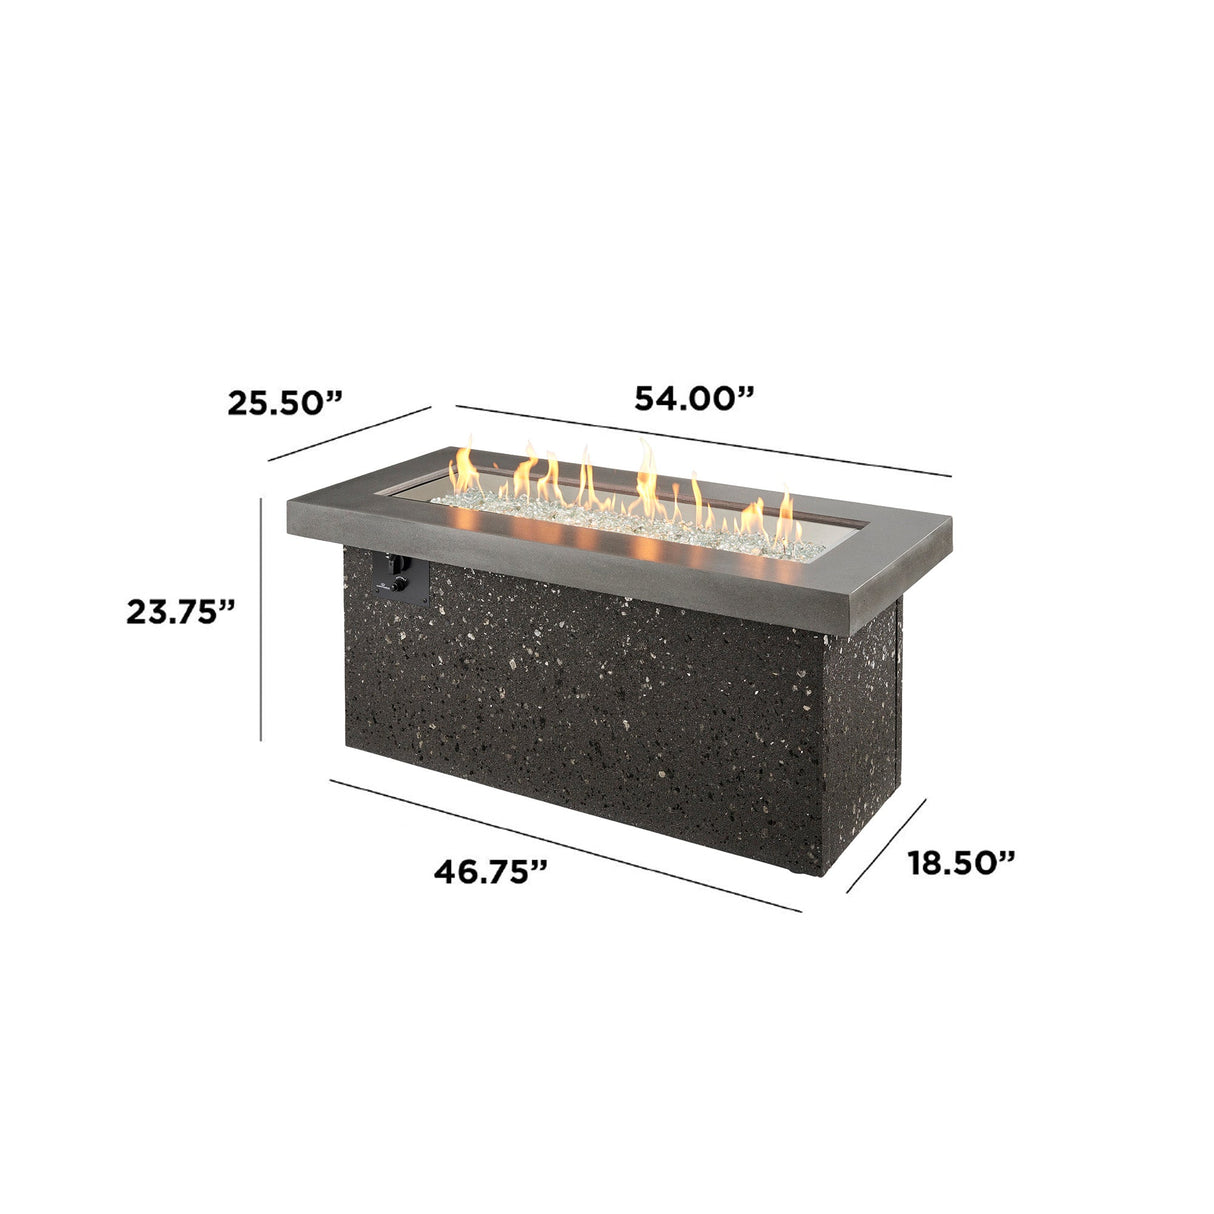 Dimensions overlaid on the Midnight Mist Key Largo Linear Gas Fire Pit Table